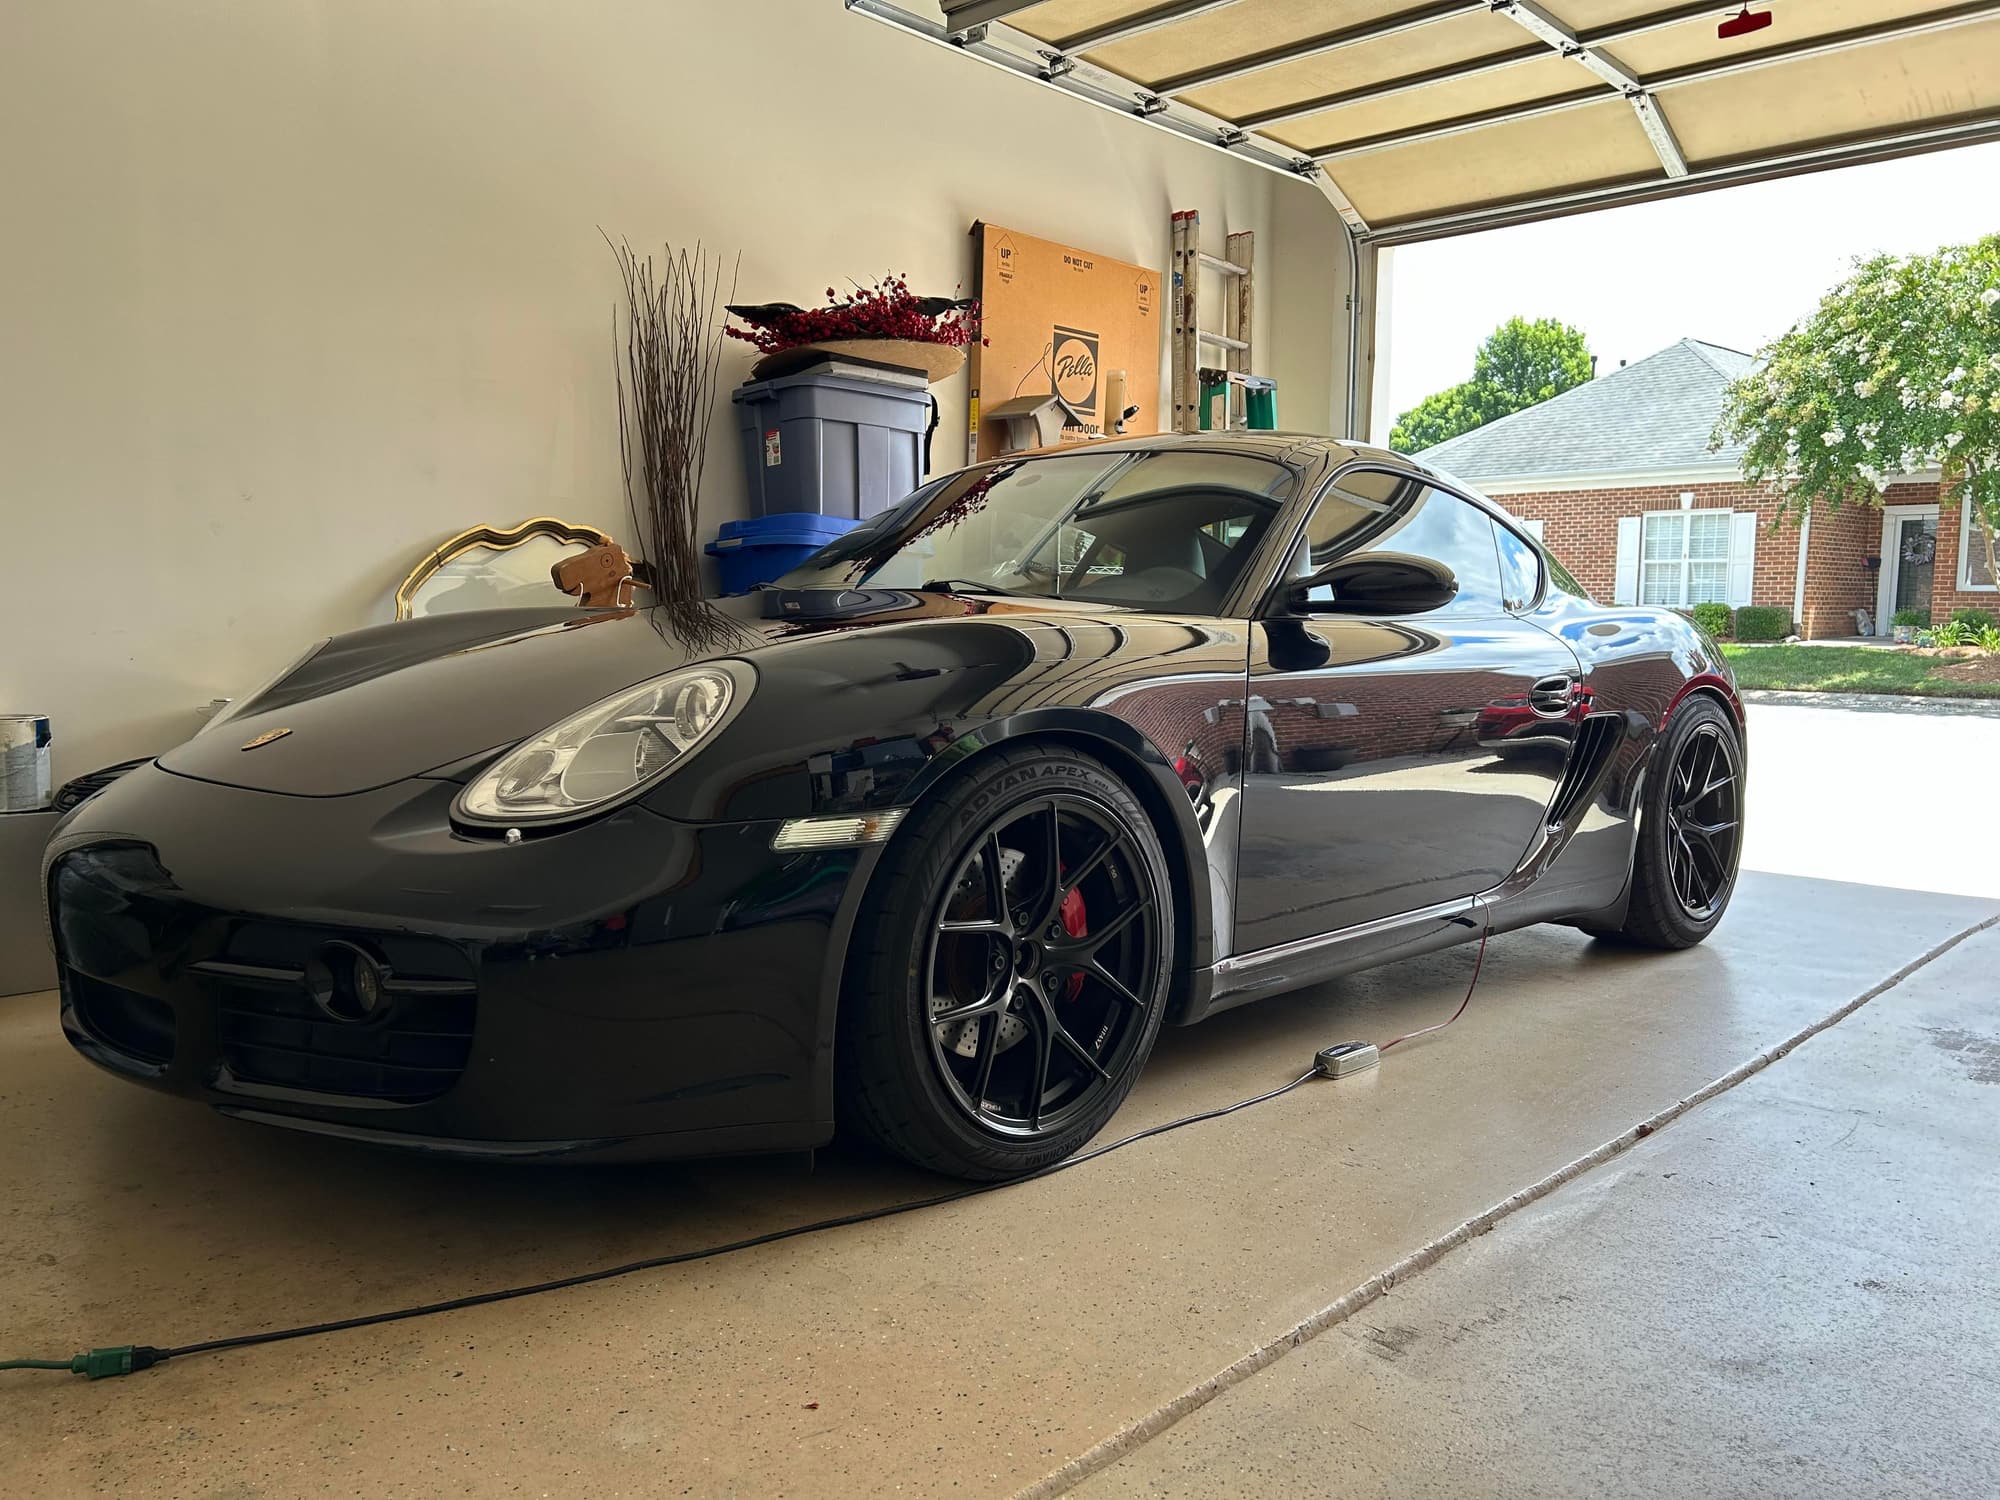 2007 Porsche Cayman - 2007 Cayman S w/ Performance Modifications - Used - Charlotte, NC 28036, United States